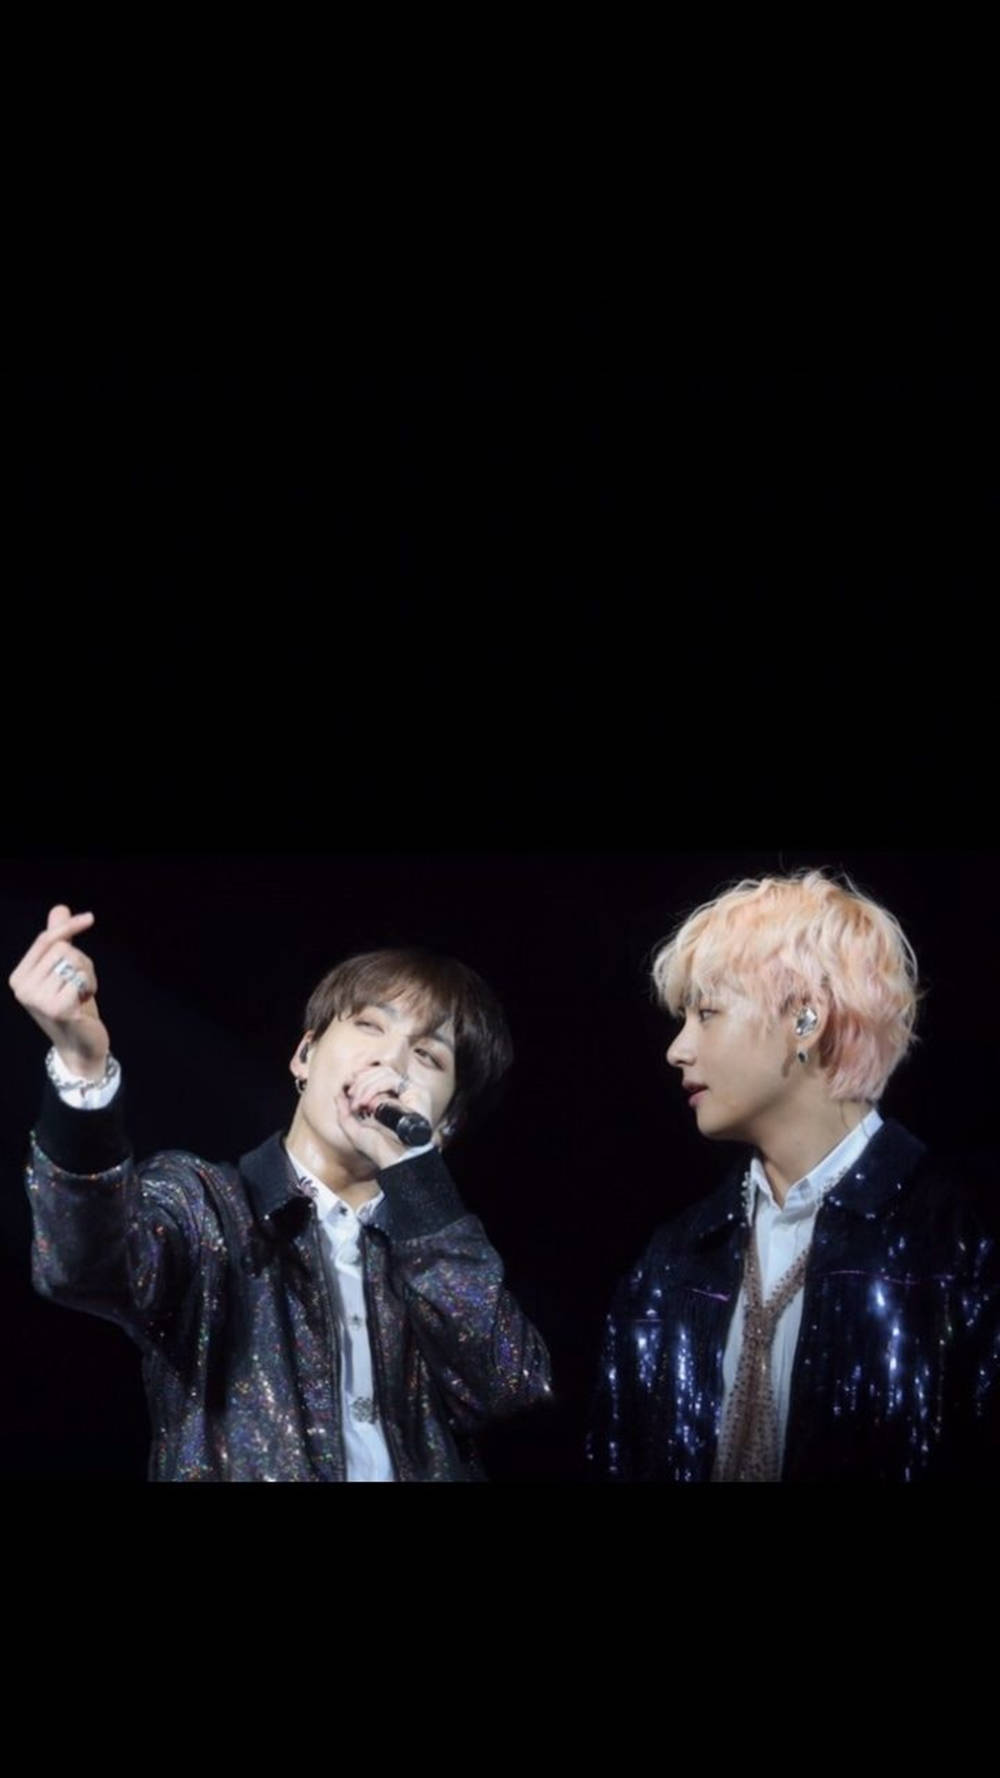 Bts Jk And V Love Yourself Tour Performance